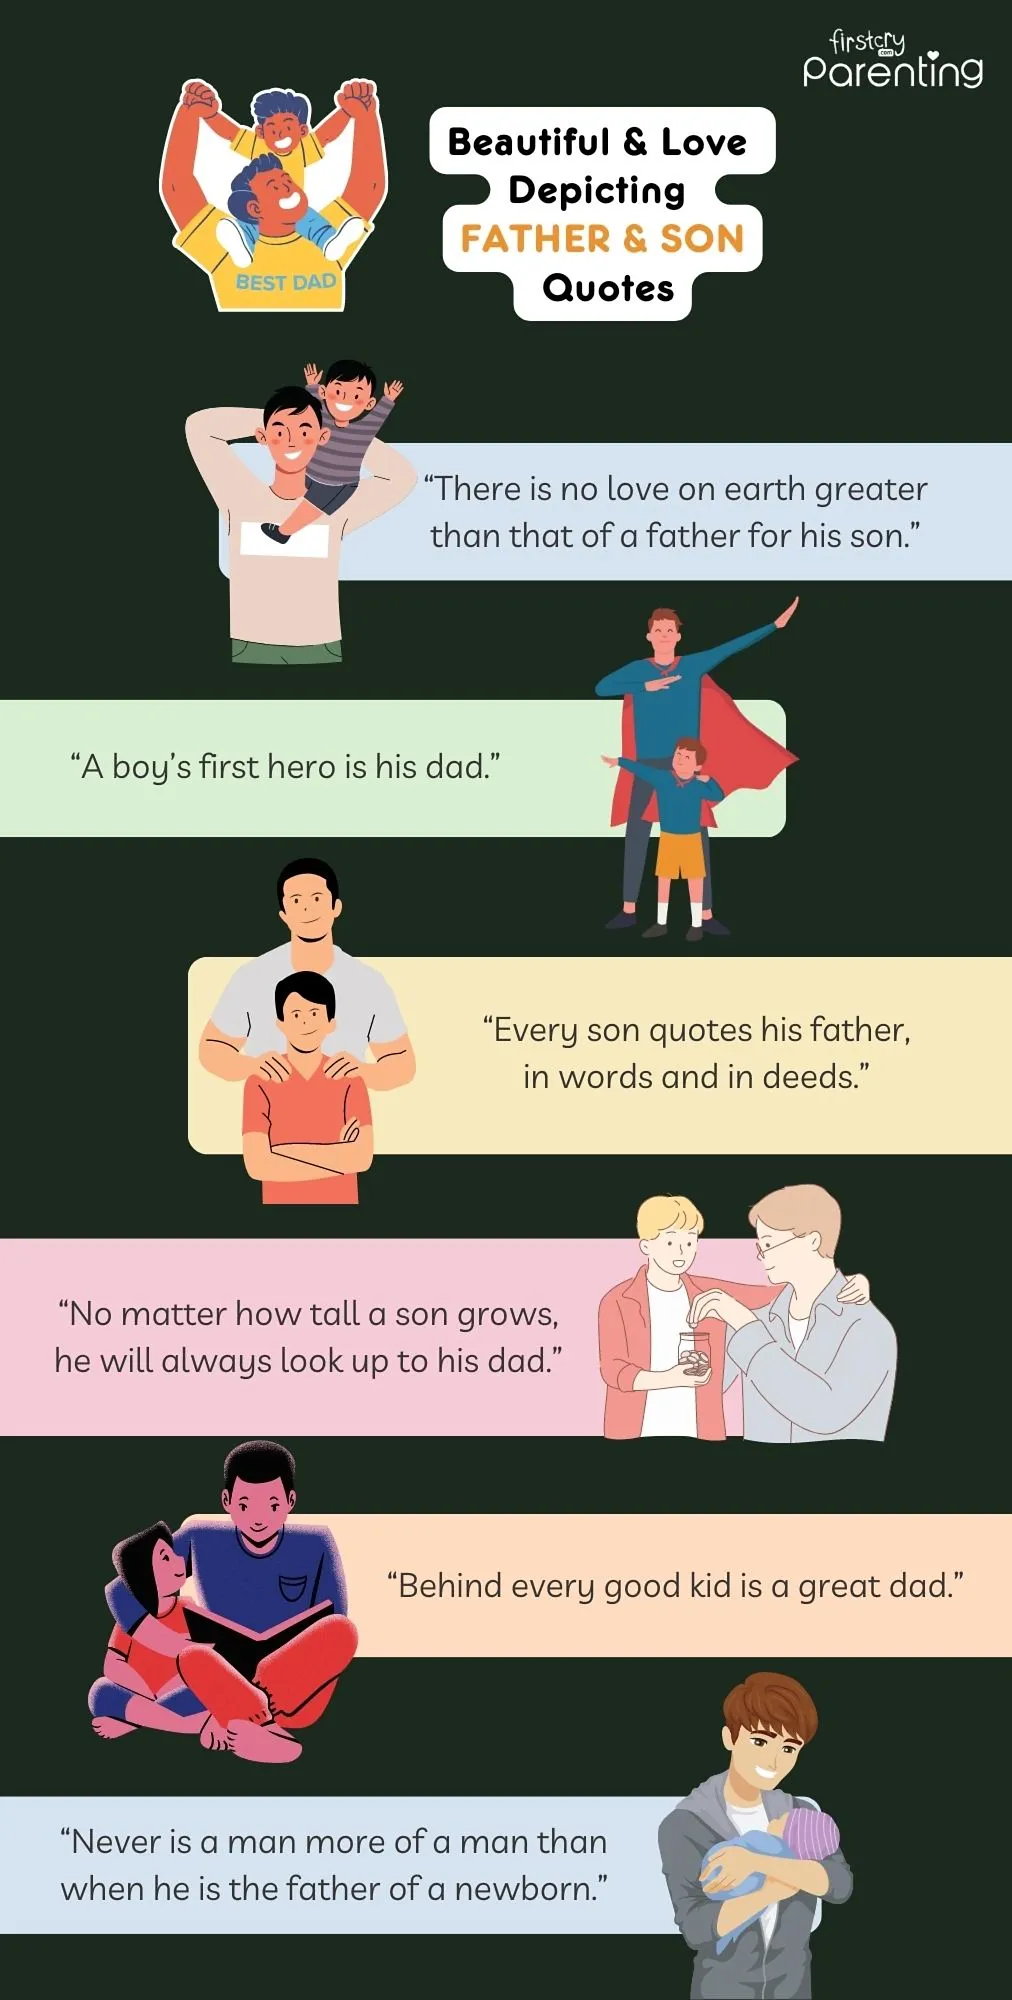 Infographic: Beautiful & Love Depicting Father & Son Quotes